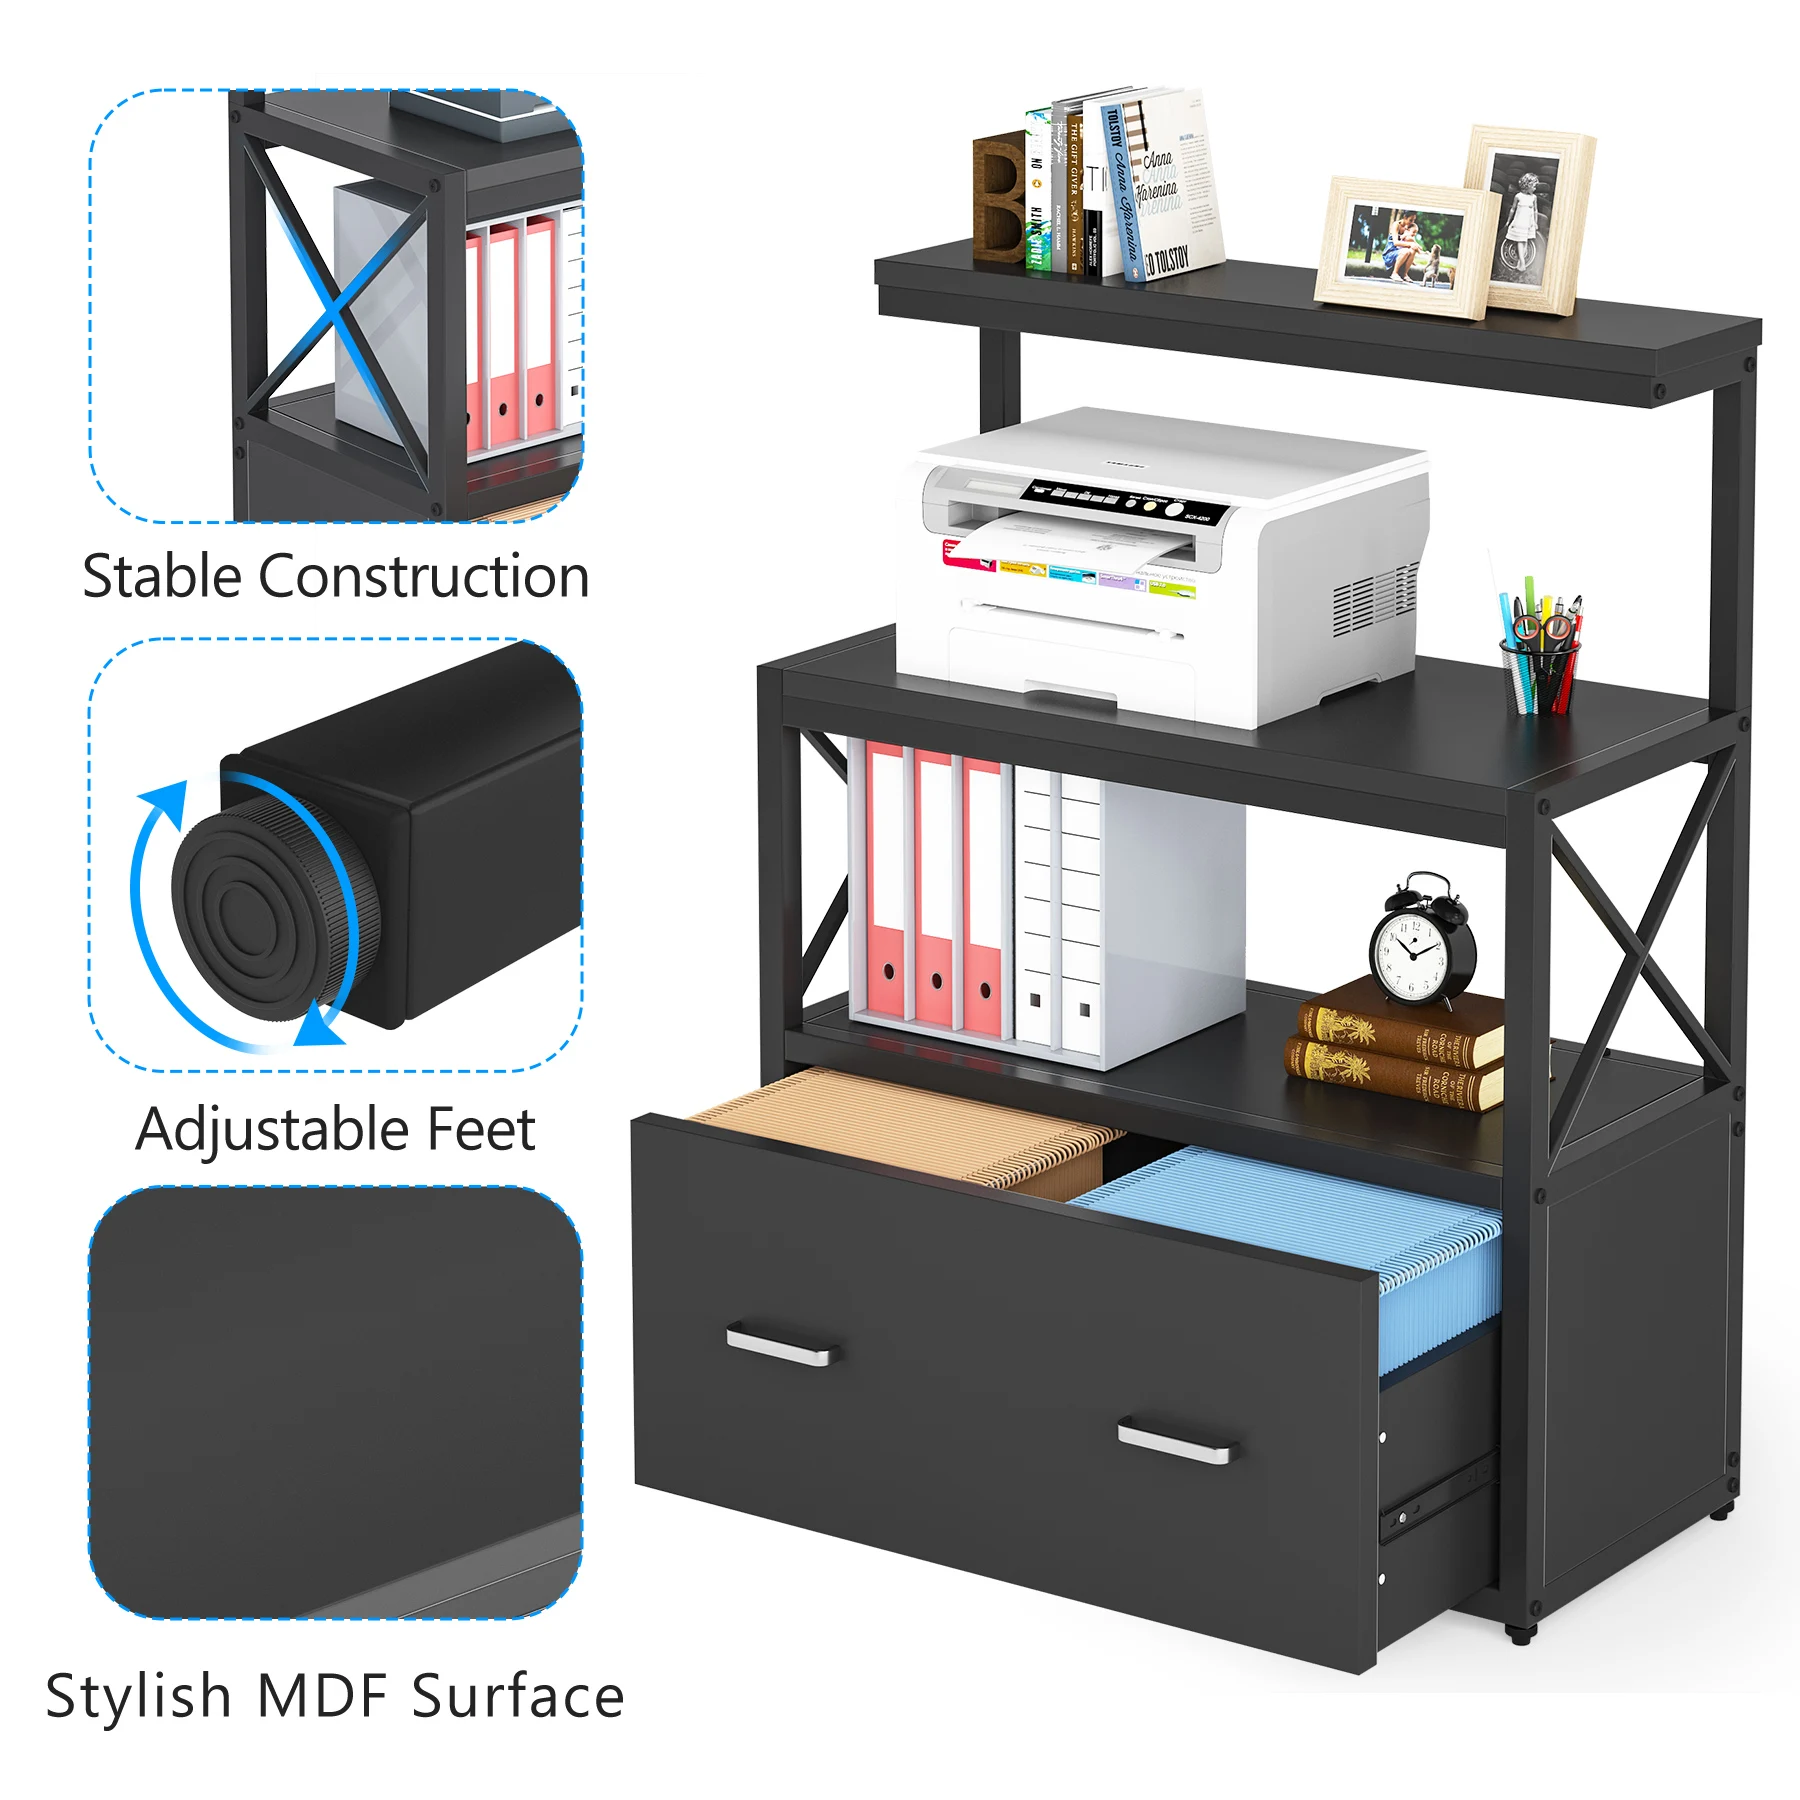 Tribesigns Modern Filing Cabinet with Drawer Metal Printer Stand with Open Storage Shelves for Home Office